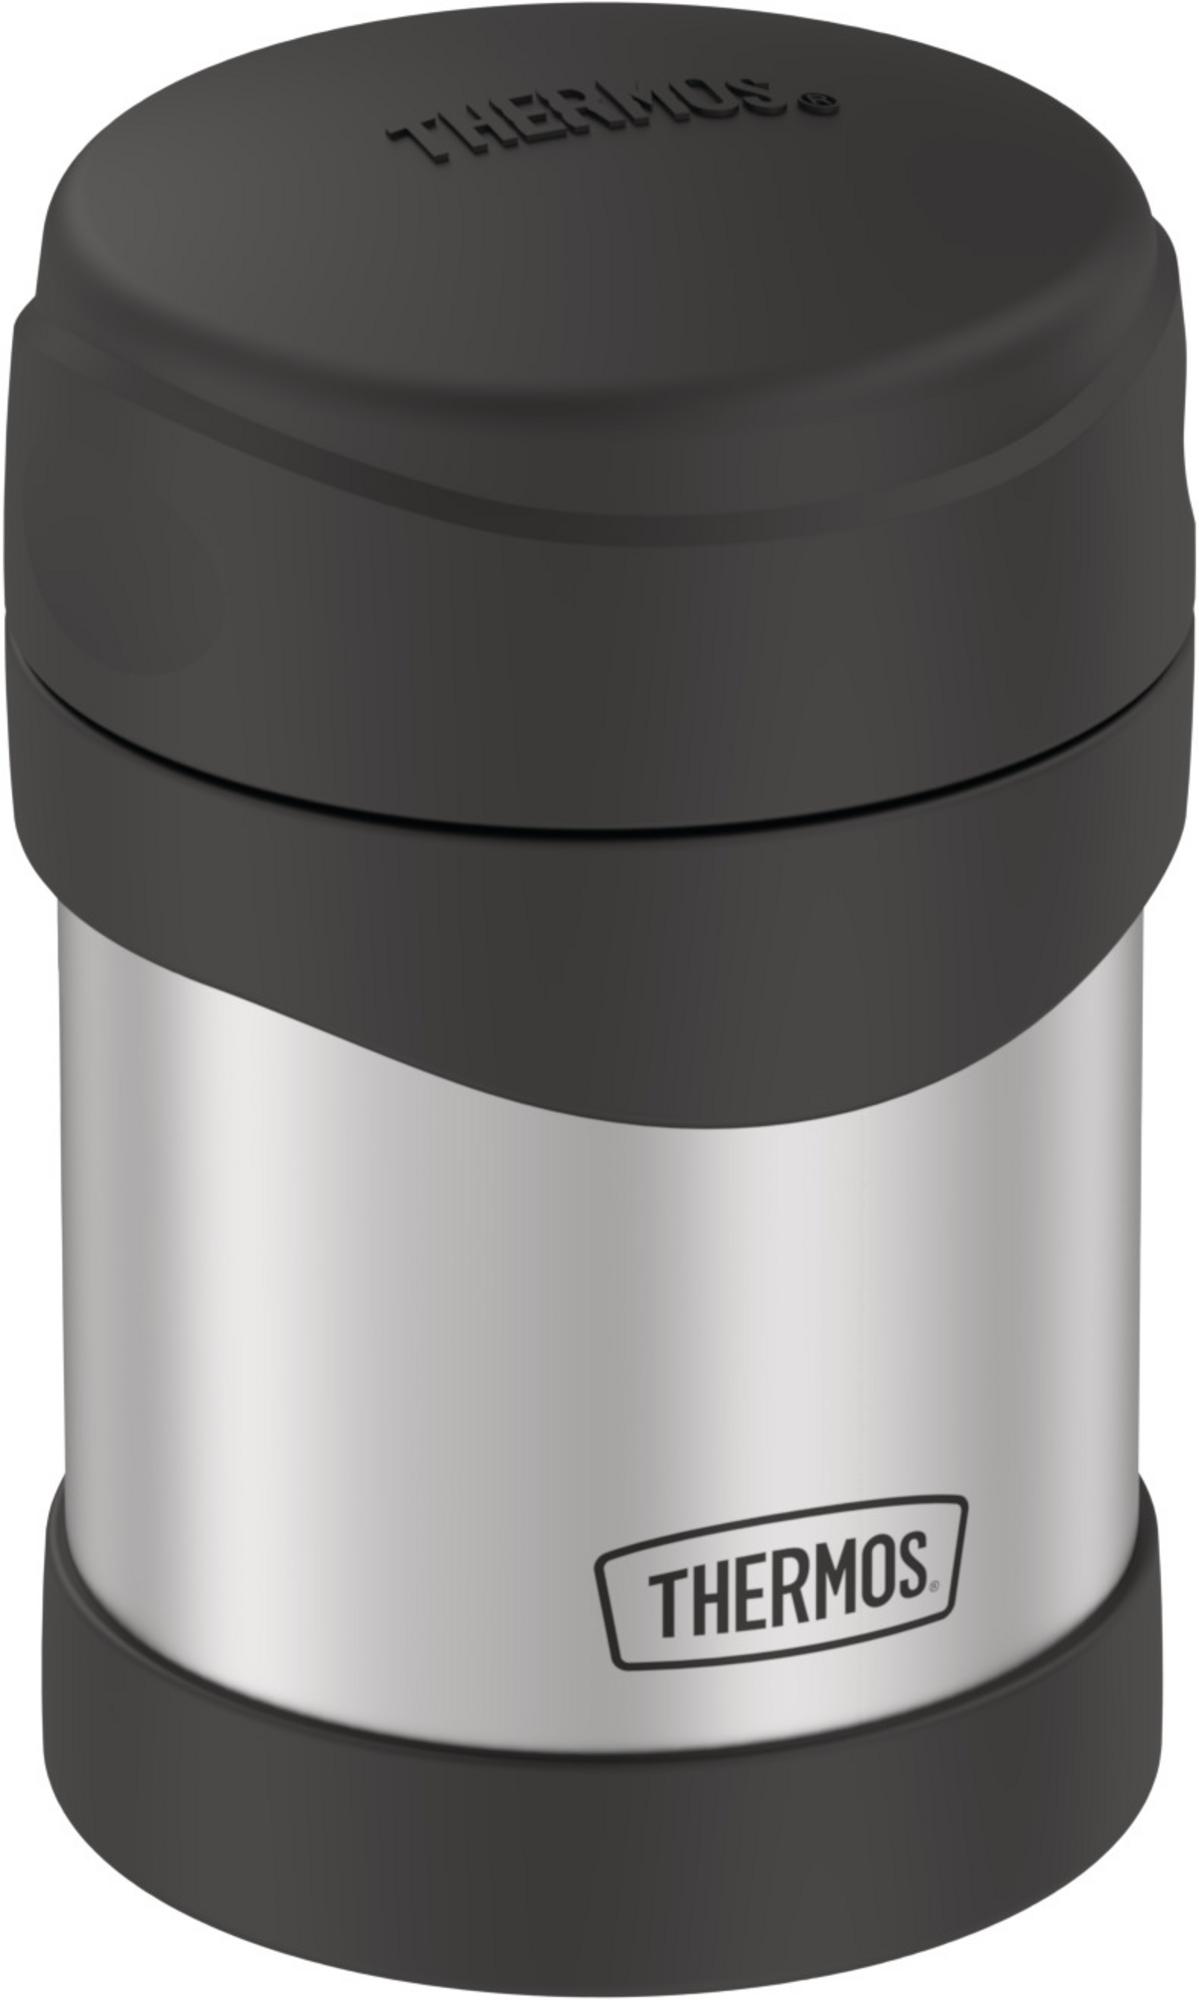 Thermos 10 Oz Vacuum Insulated Food Jar, Stainless Steel - image 3 of 5